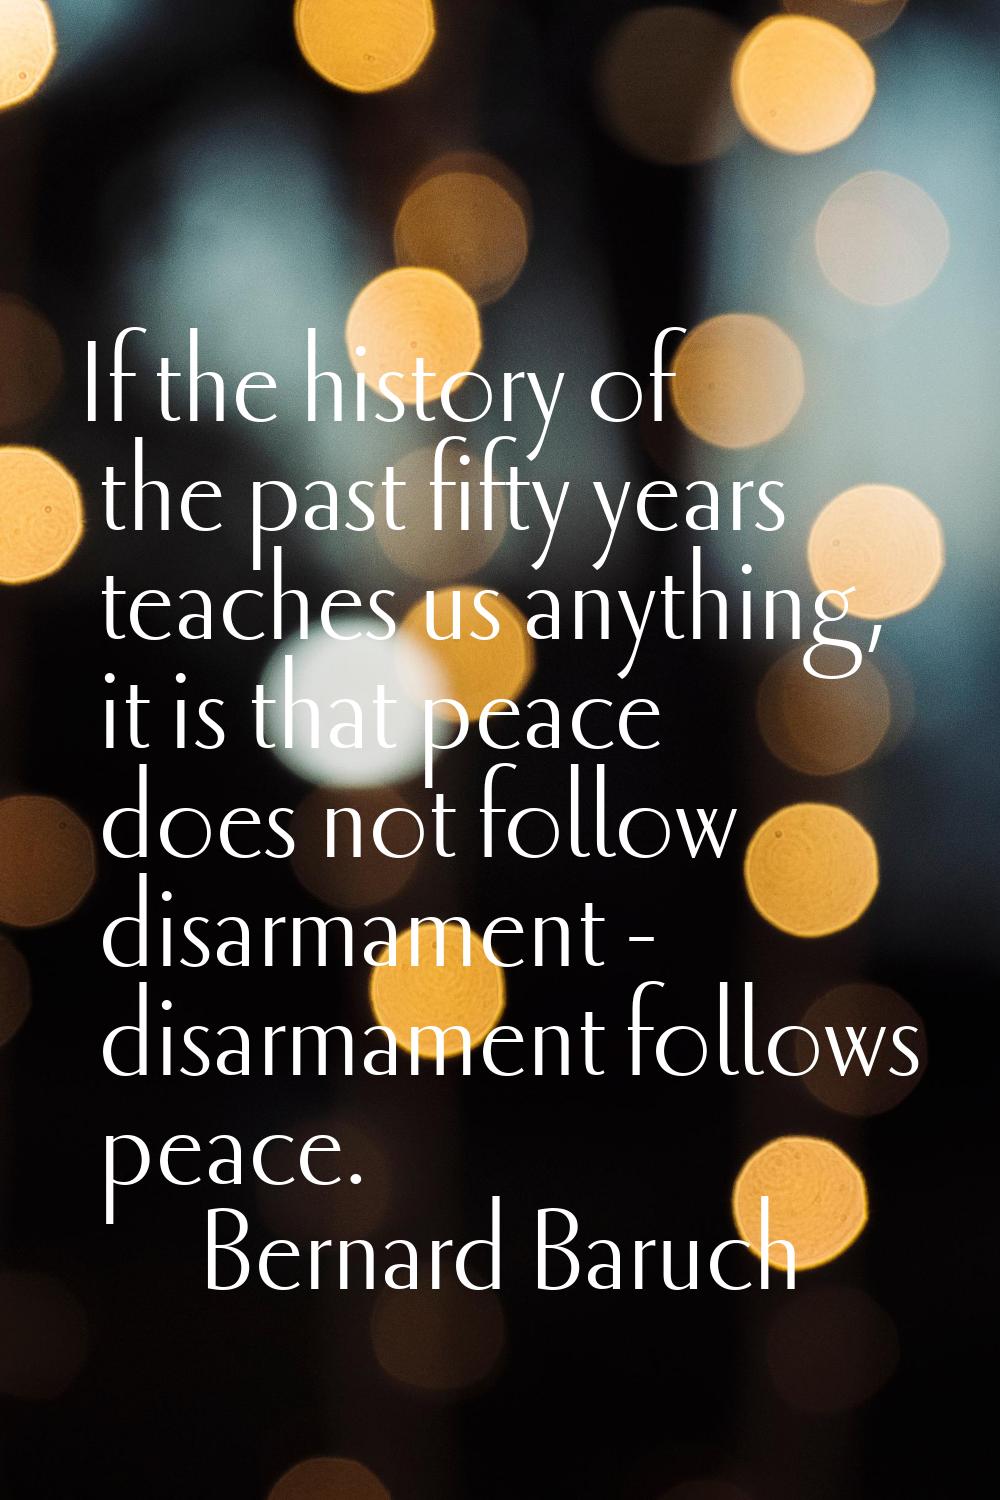 If the history of the past fifty years teaches us anything, it is that peace does not follow disarm